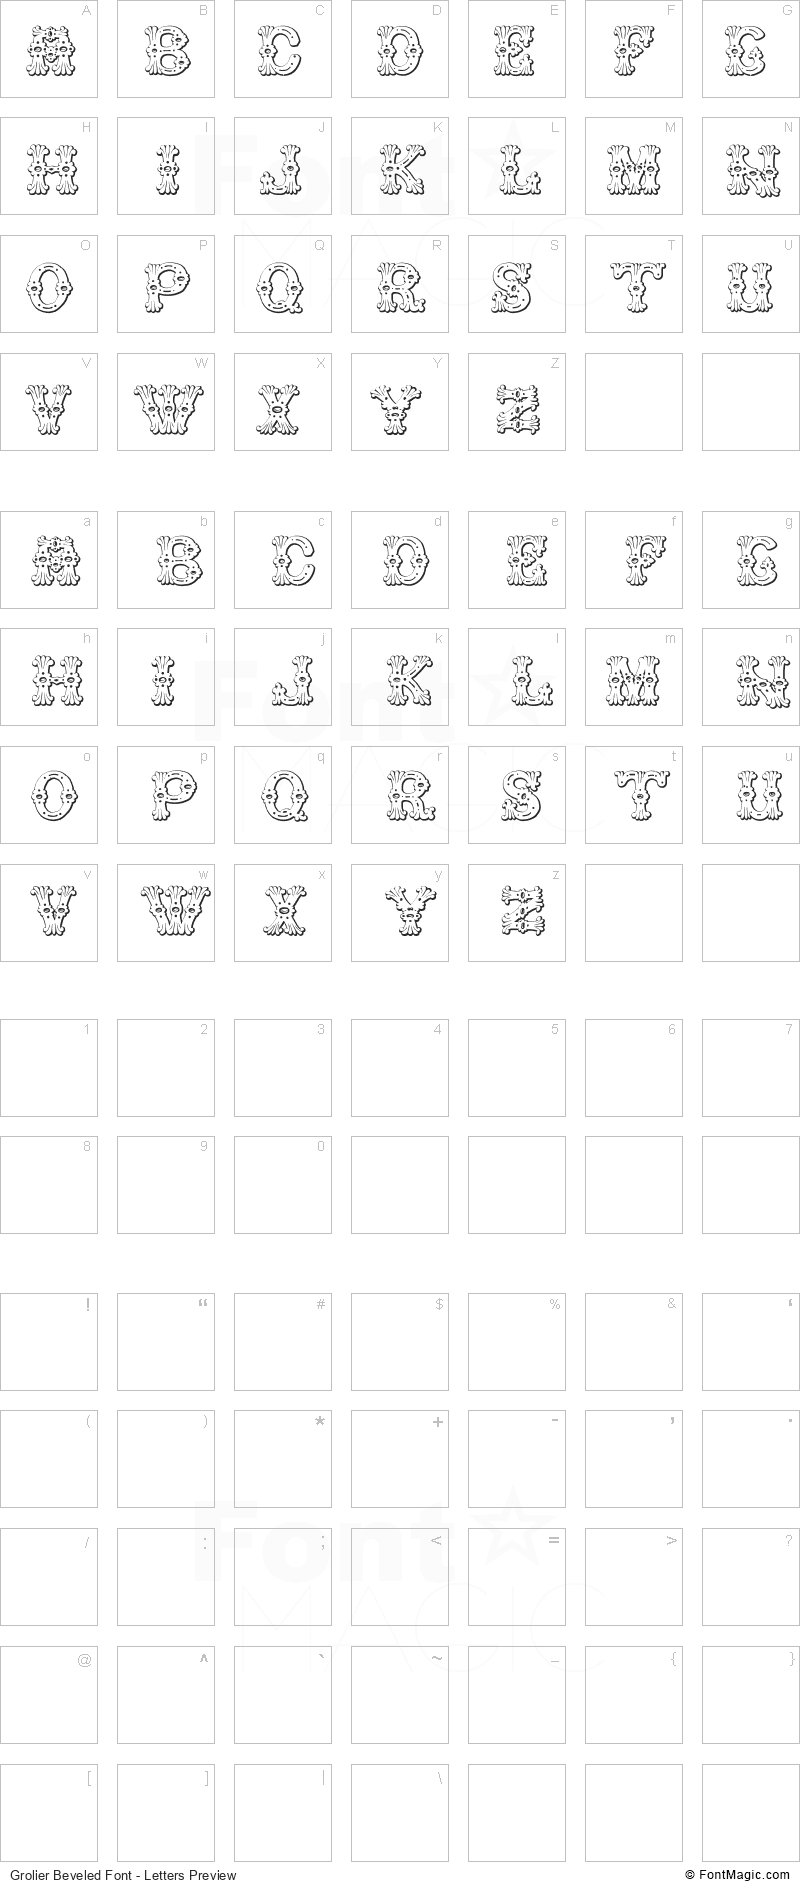 Grolier Beveled Font - All Latters Preview Chart